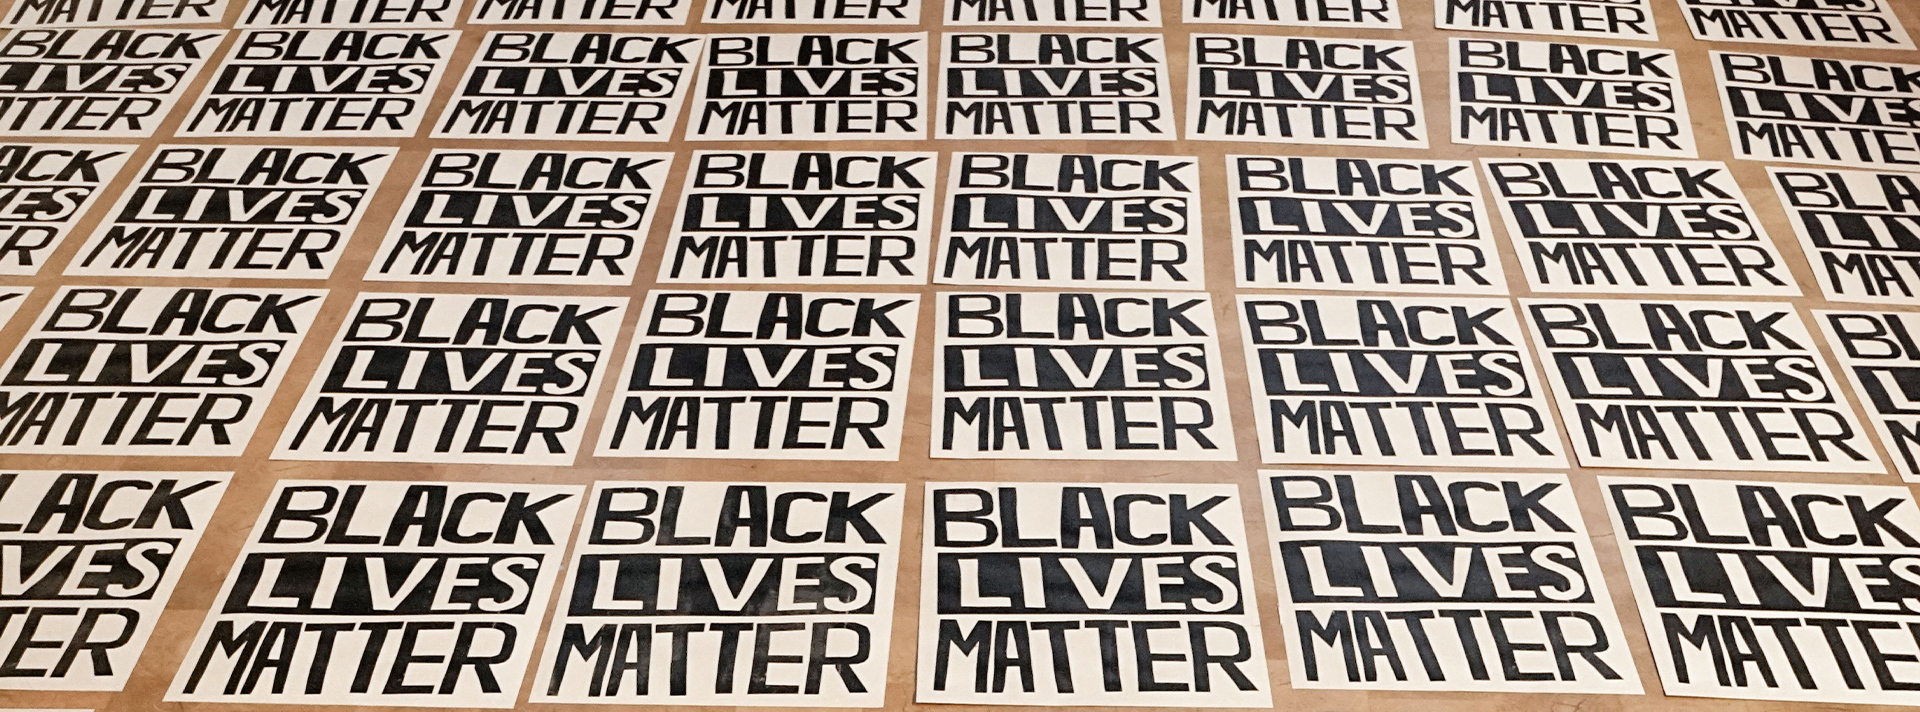 Hundreds of black lives matter posters laying on the wanda d ewing gallery floor